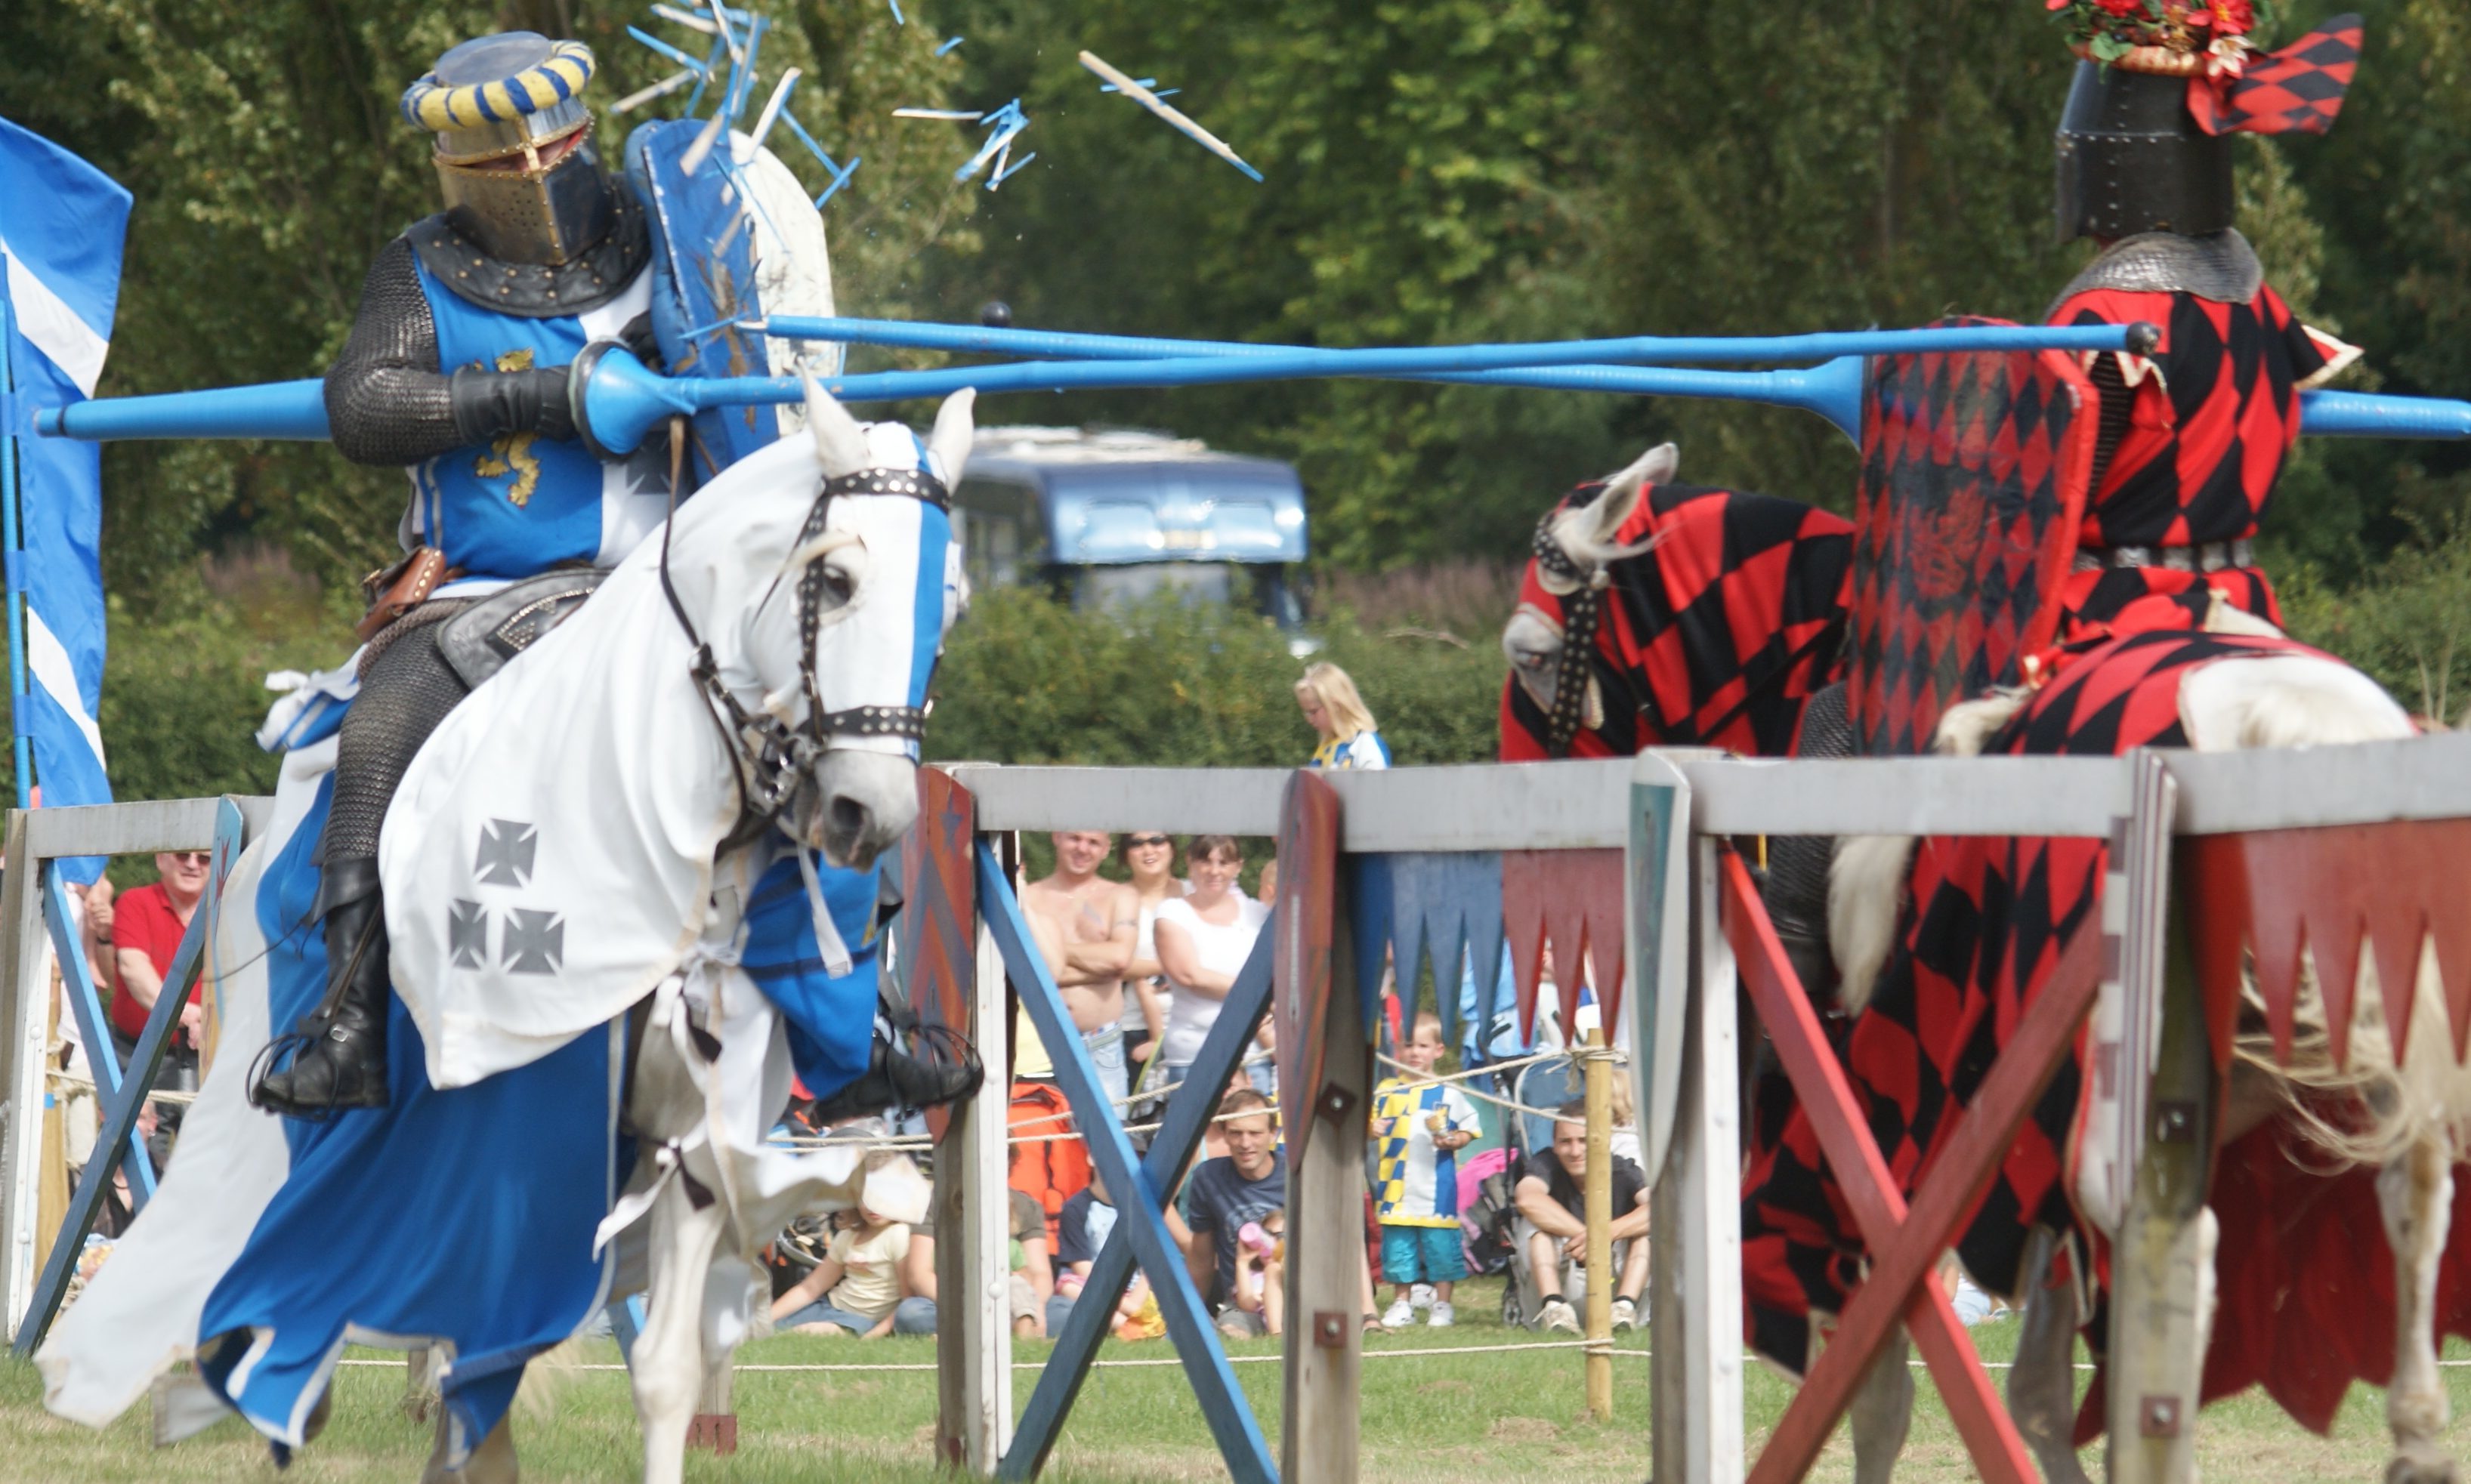 Jousting at the Mary Queen of Scots Festival.